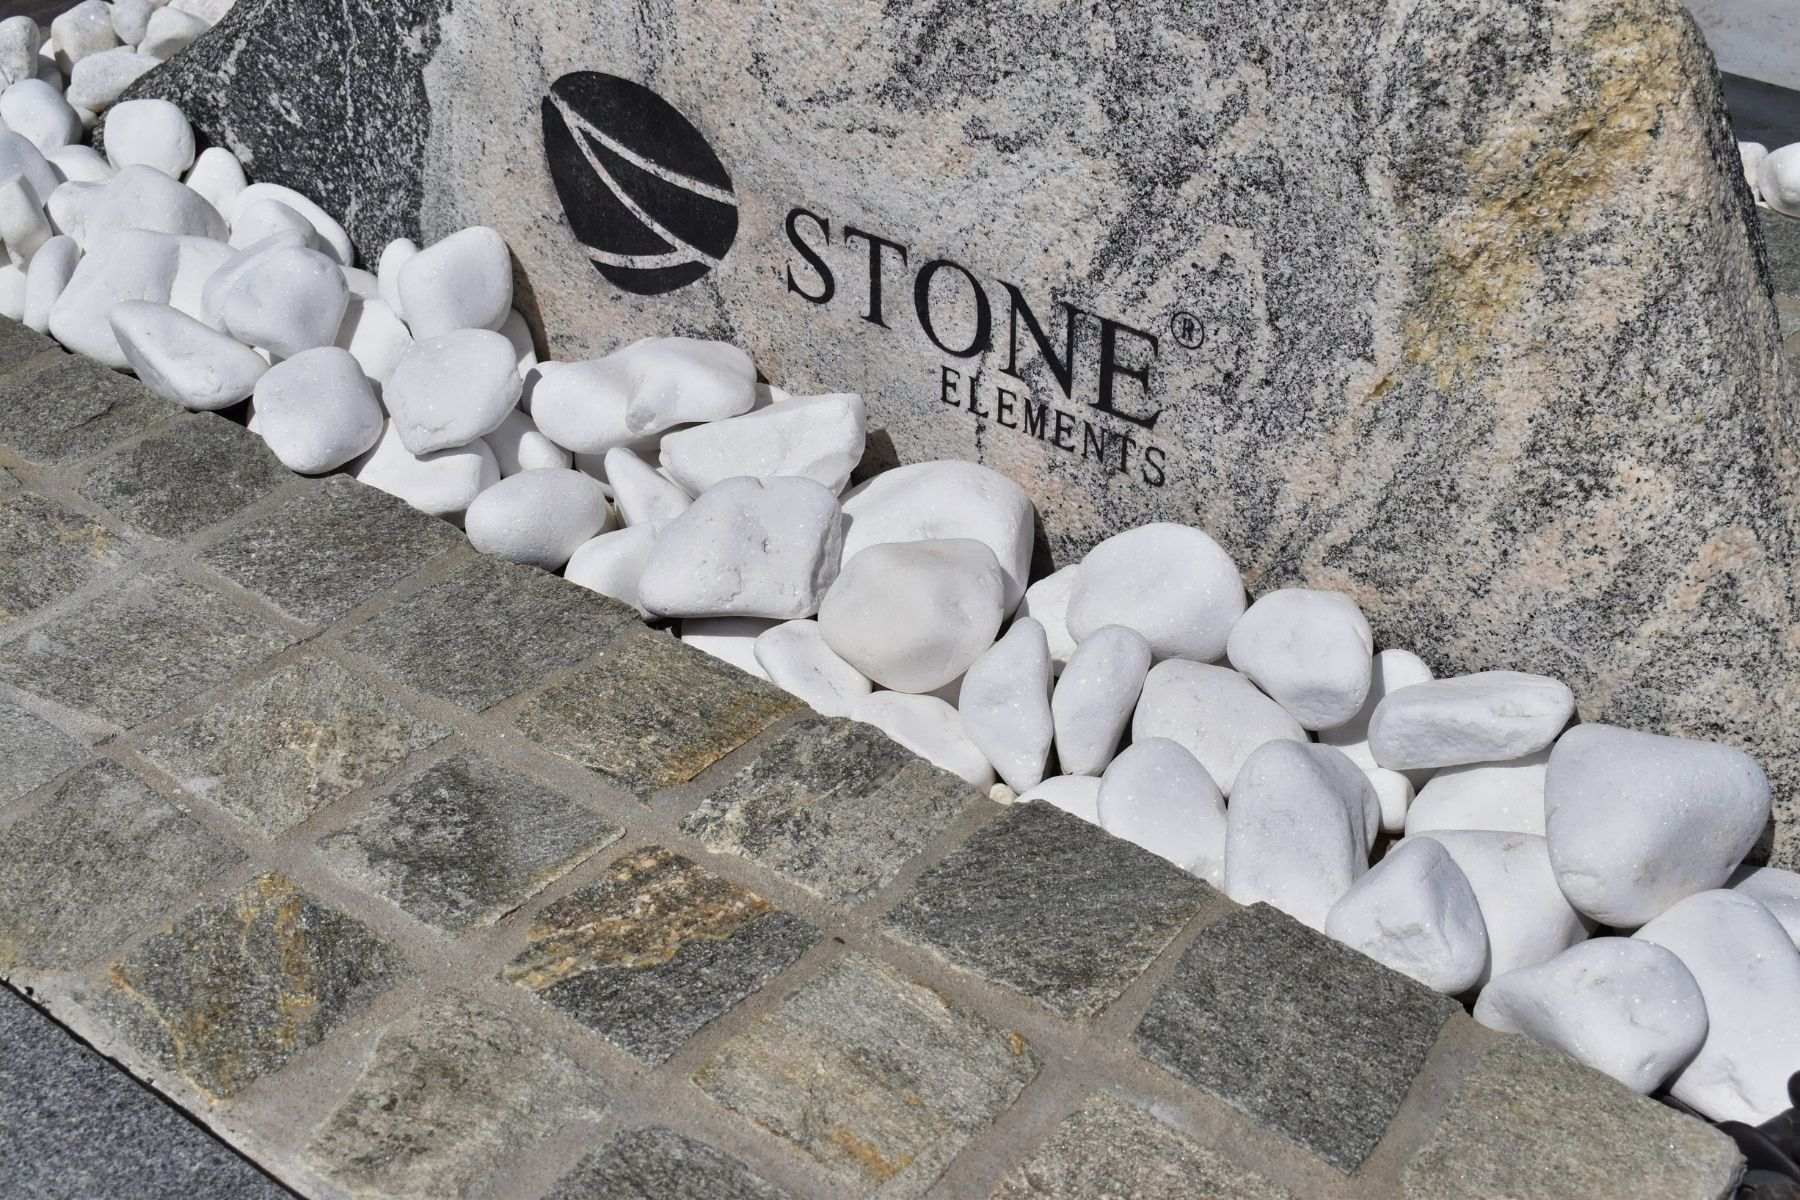 white pebbles large and round at base of garden sculpture